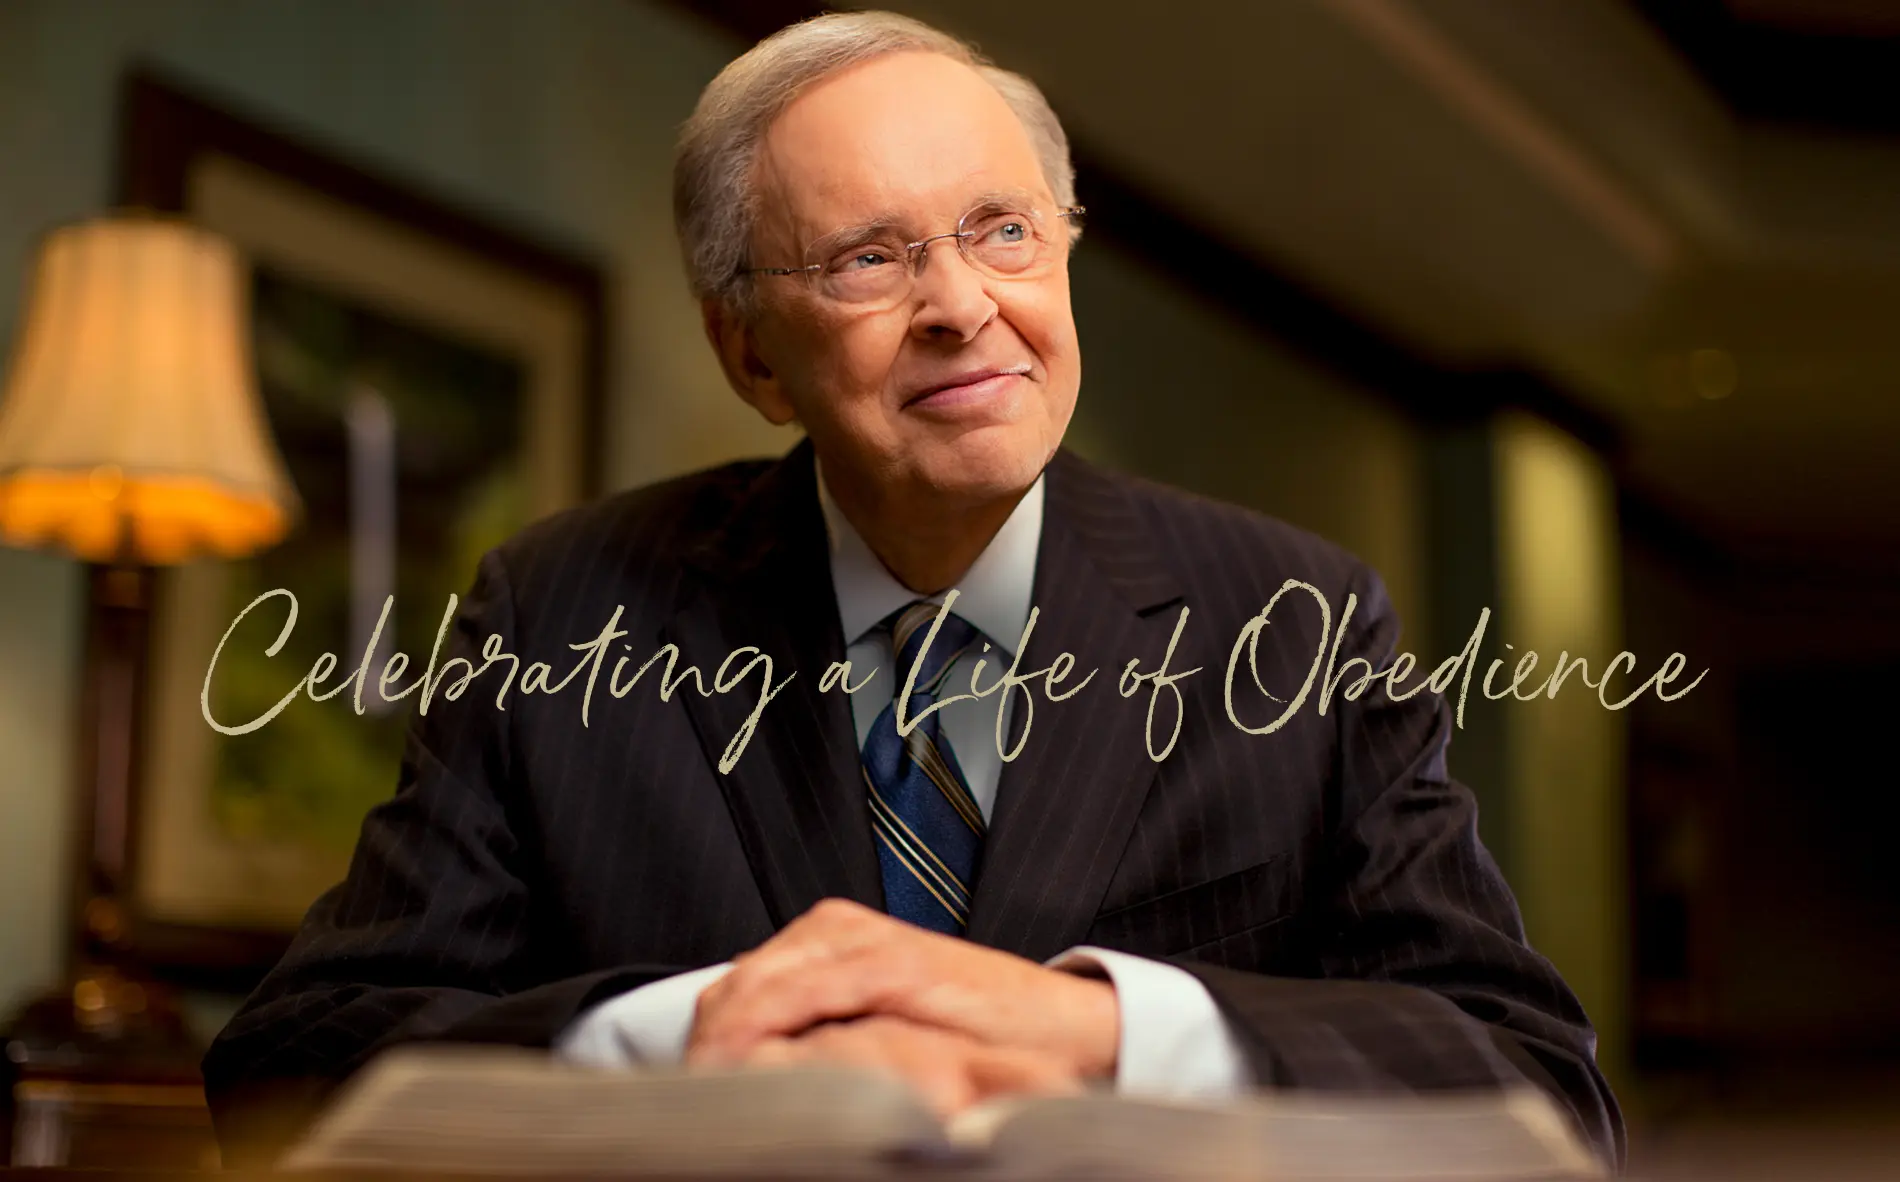 HIS WAY MINE: A TRIBUTE TO DR. CHARLES STANLEY’S LIFE AND MINISTRY